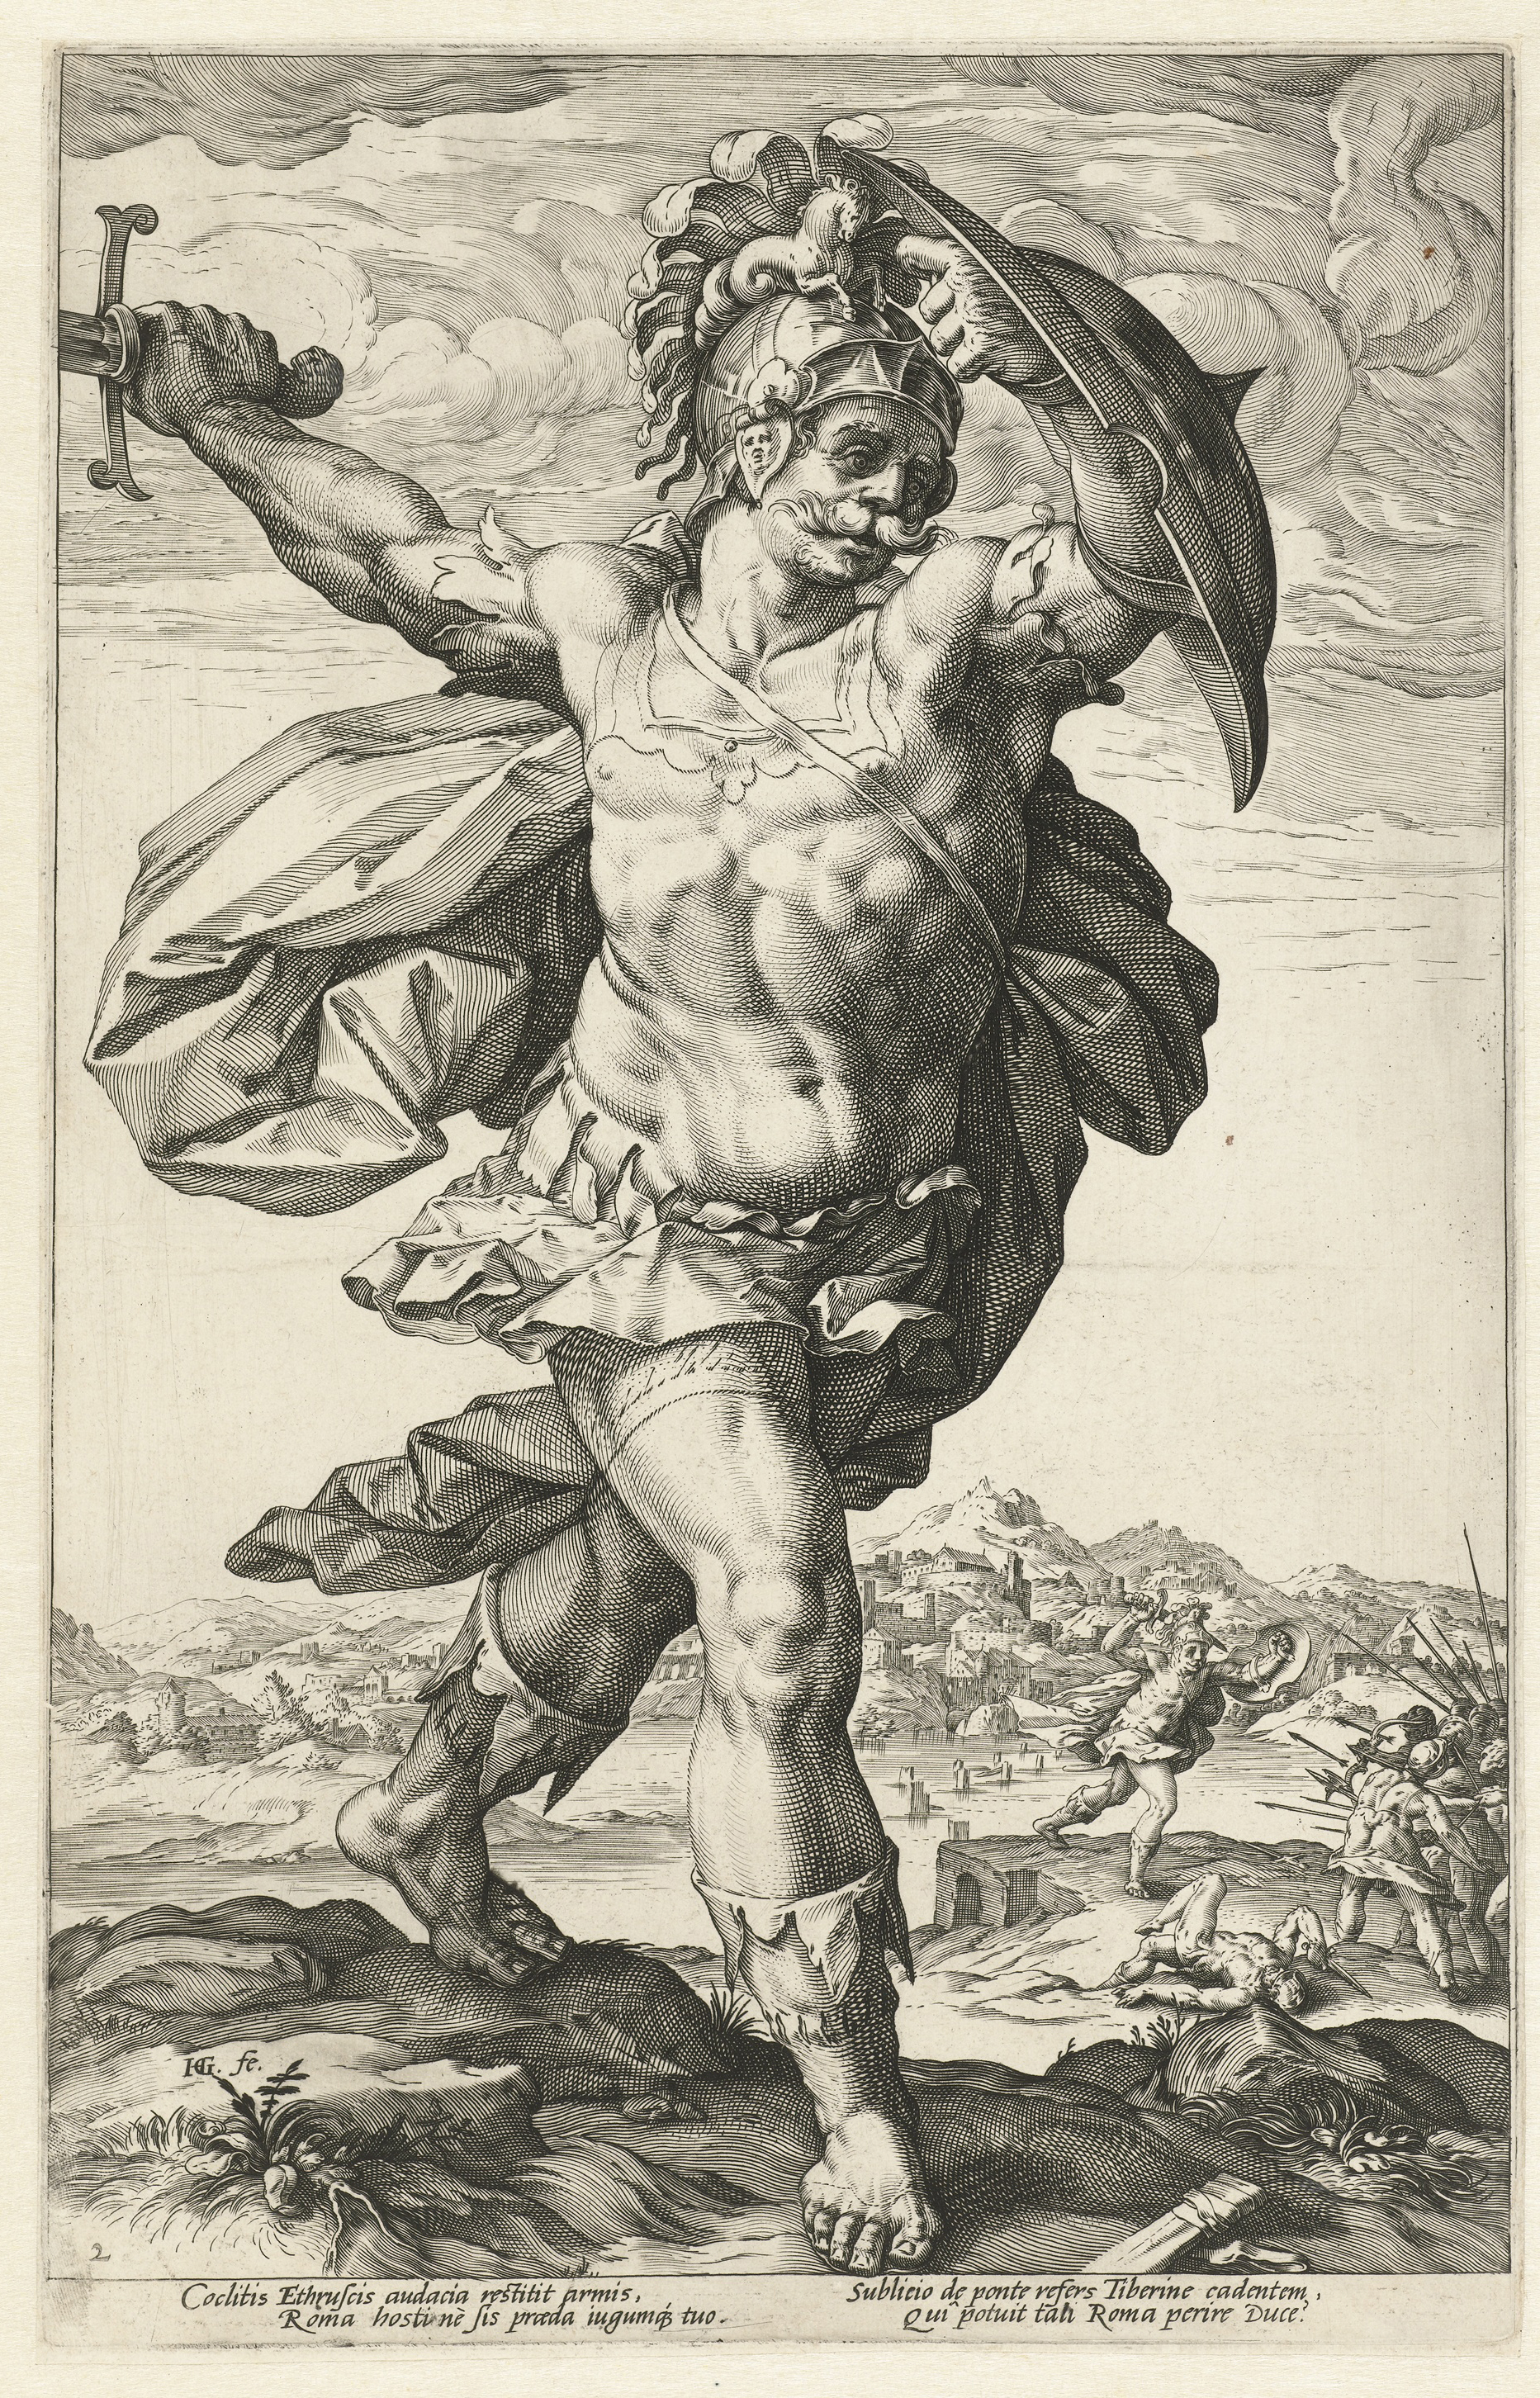 Horatius Cocles, a fanciful 1586 engraving by Hendrick Goltzius